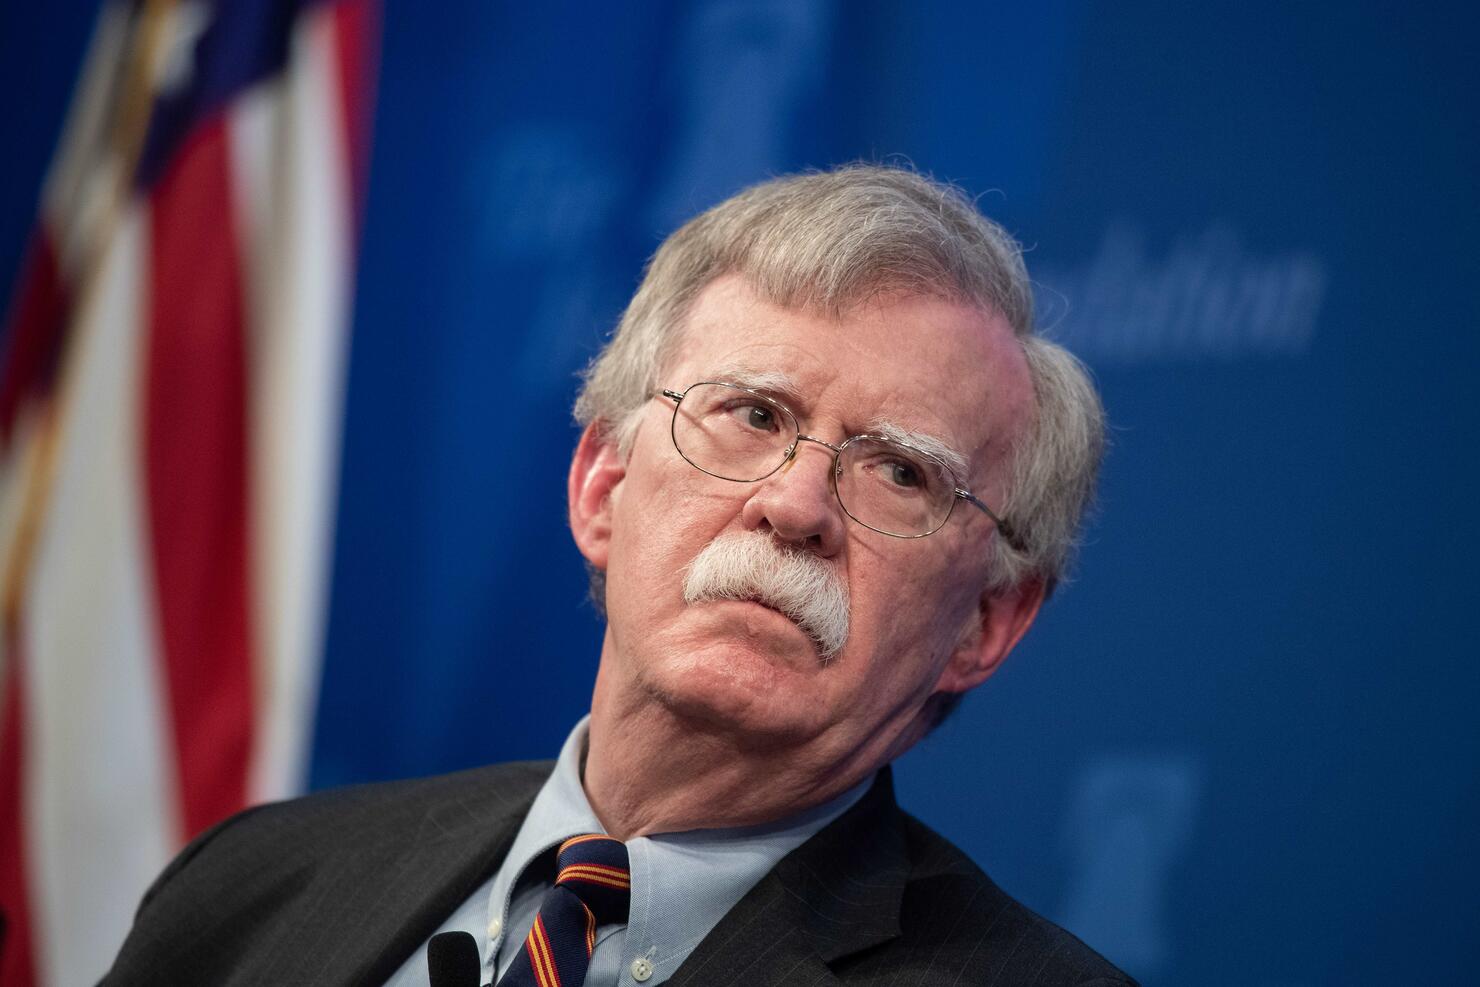 National Security Adviser John Bolton asked Pentagon to draw up plans to attack Iran